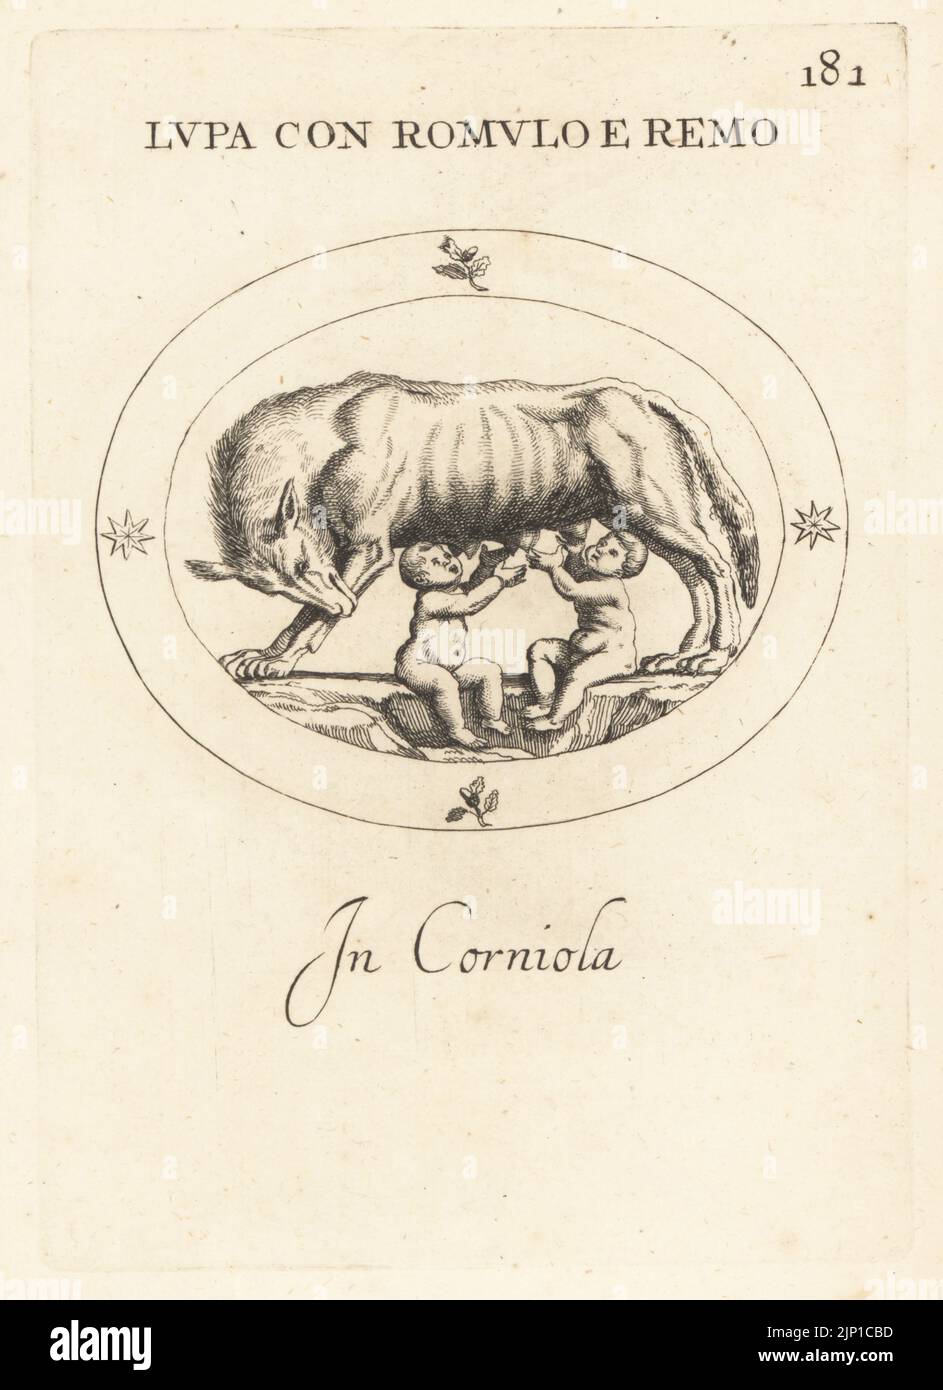 Romulus and Remus, legendary founders of Rome, suckled by a wolf. In carnelian. Lupa con Romulo e Remo. In corniola. Copperplate engraving by Giovanni Battista Galestruzzi after Leonardo Agostini from Gemmae et Sculpturae Antiquae Depicti ab Leonardo Augustino Senesi, Abraham Blooteling, Amsterdam, 1685. Stock Photo